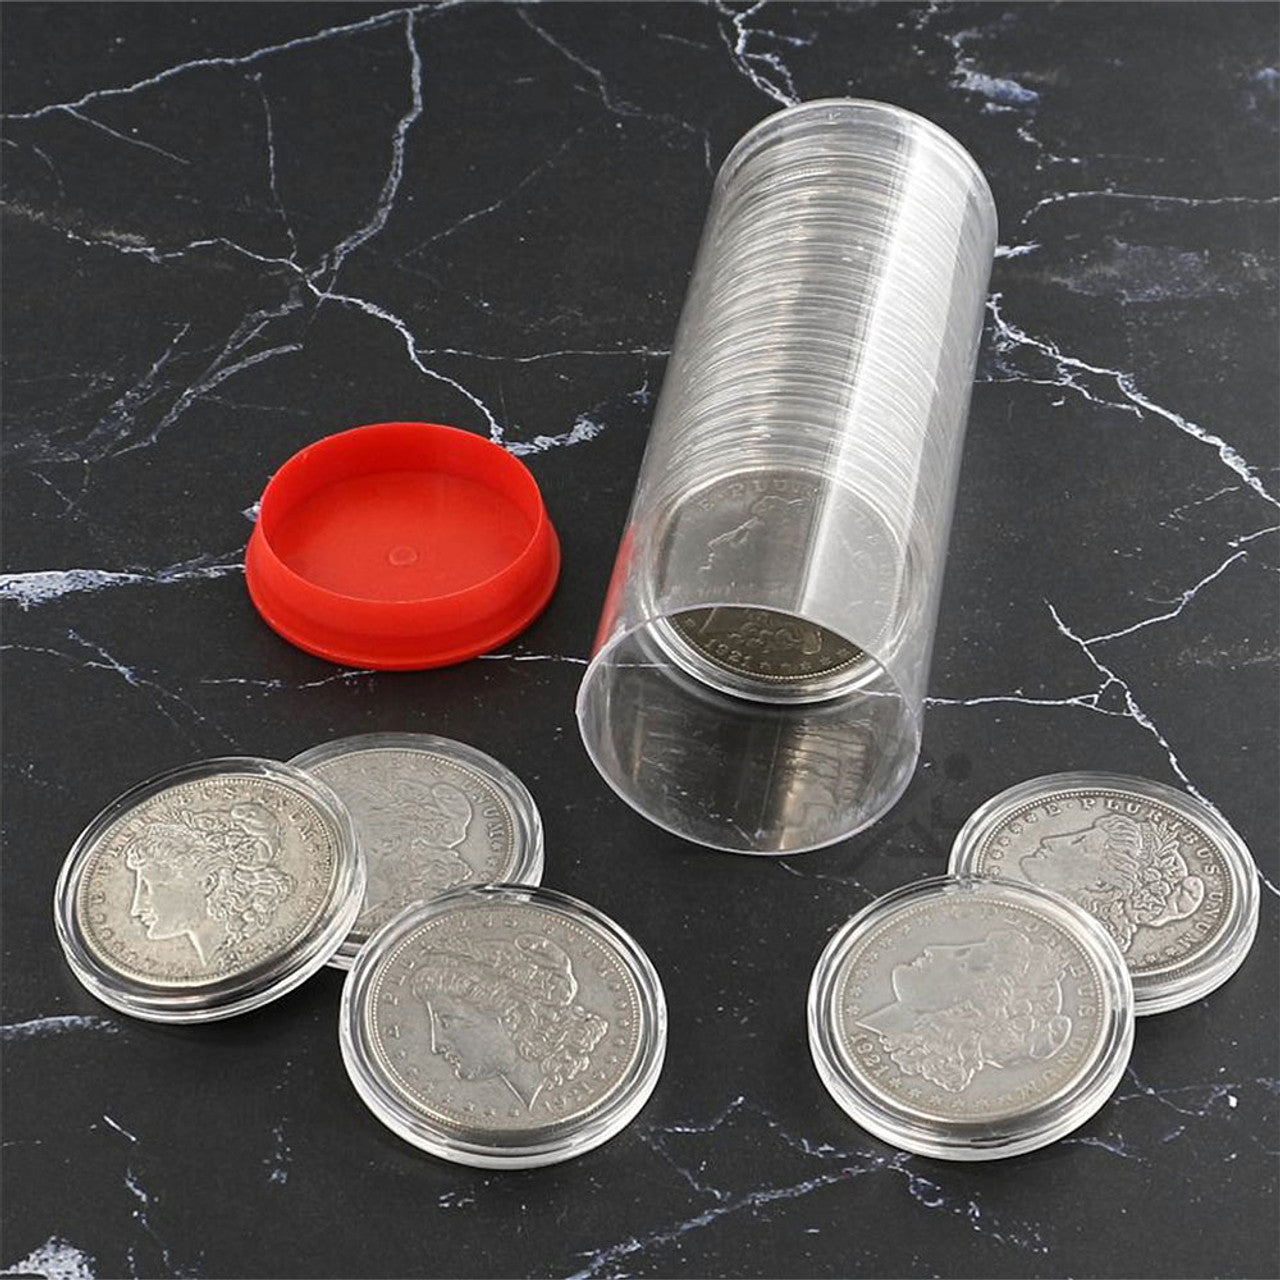 38.1mm Direct Fit Coin Holders for 1oz Silver Dollars